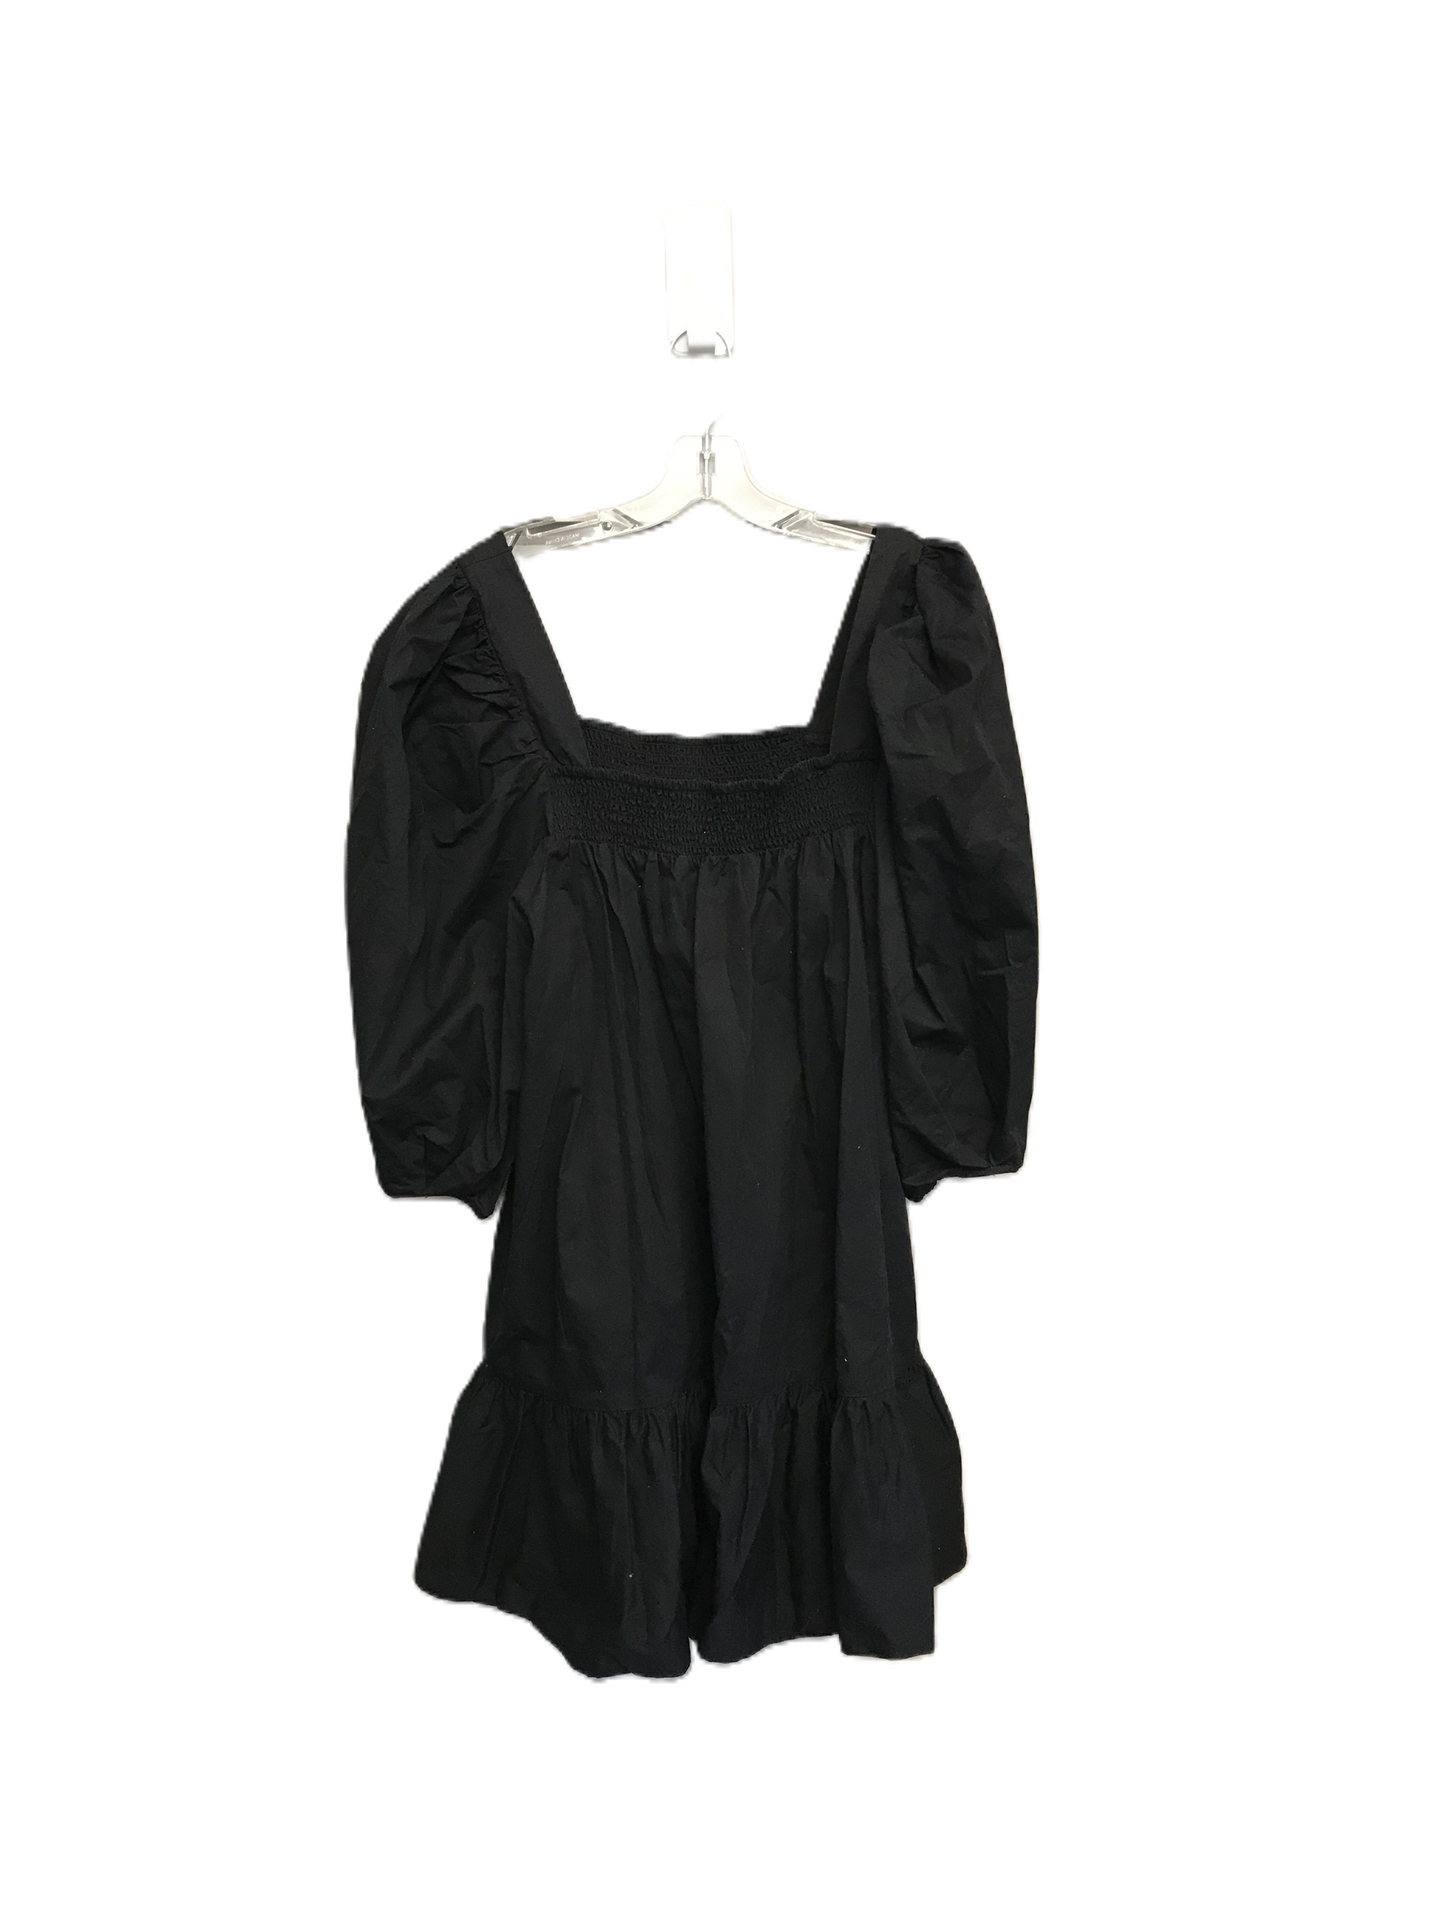 Black Dress Casual Short By H&m, Size: 1x